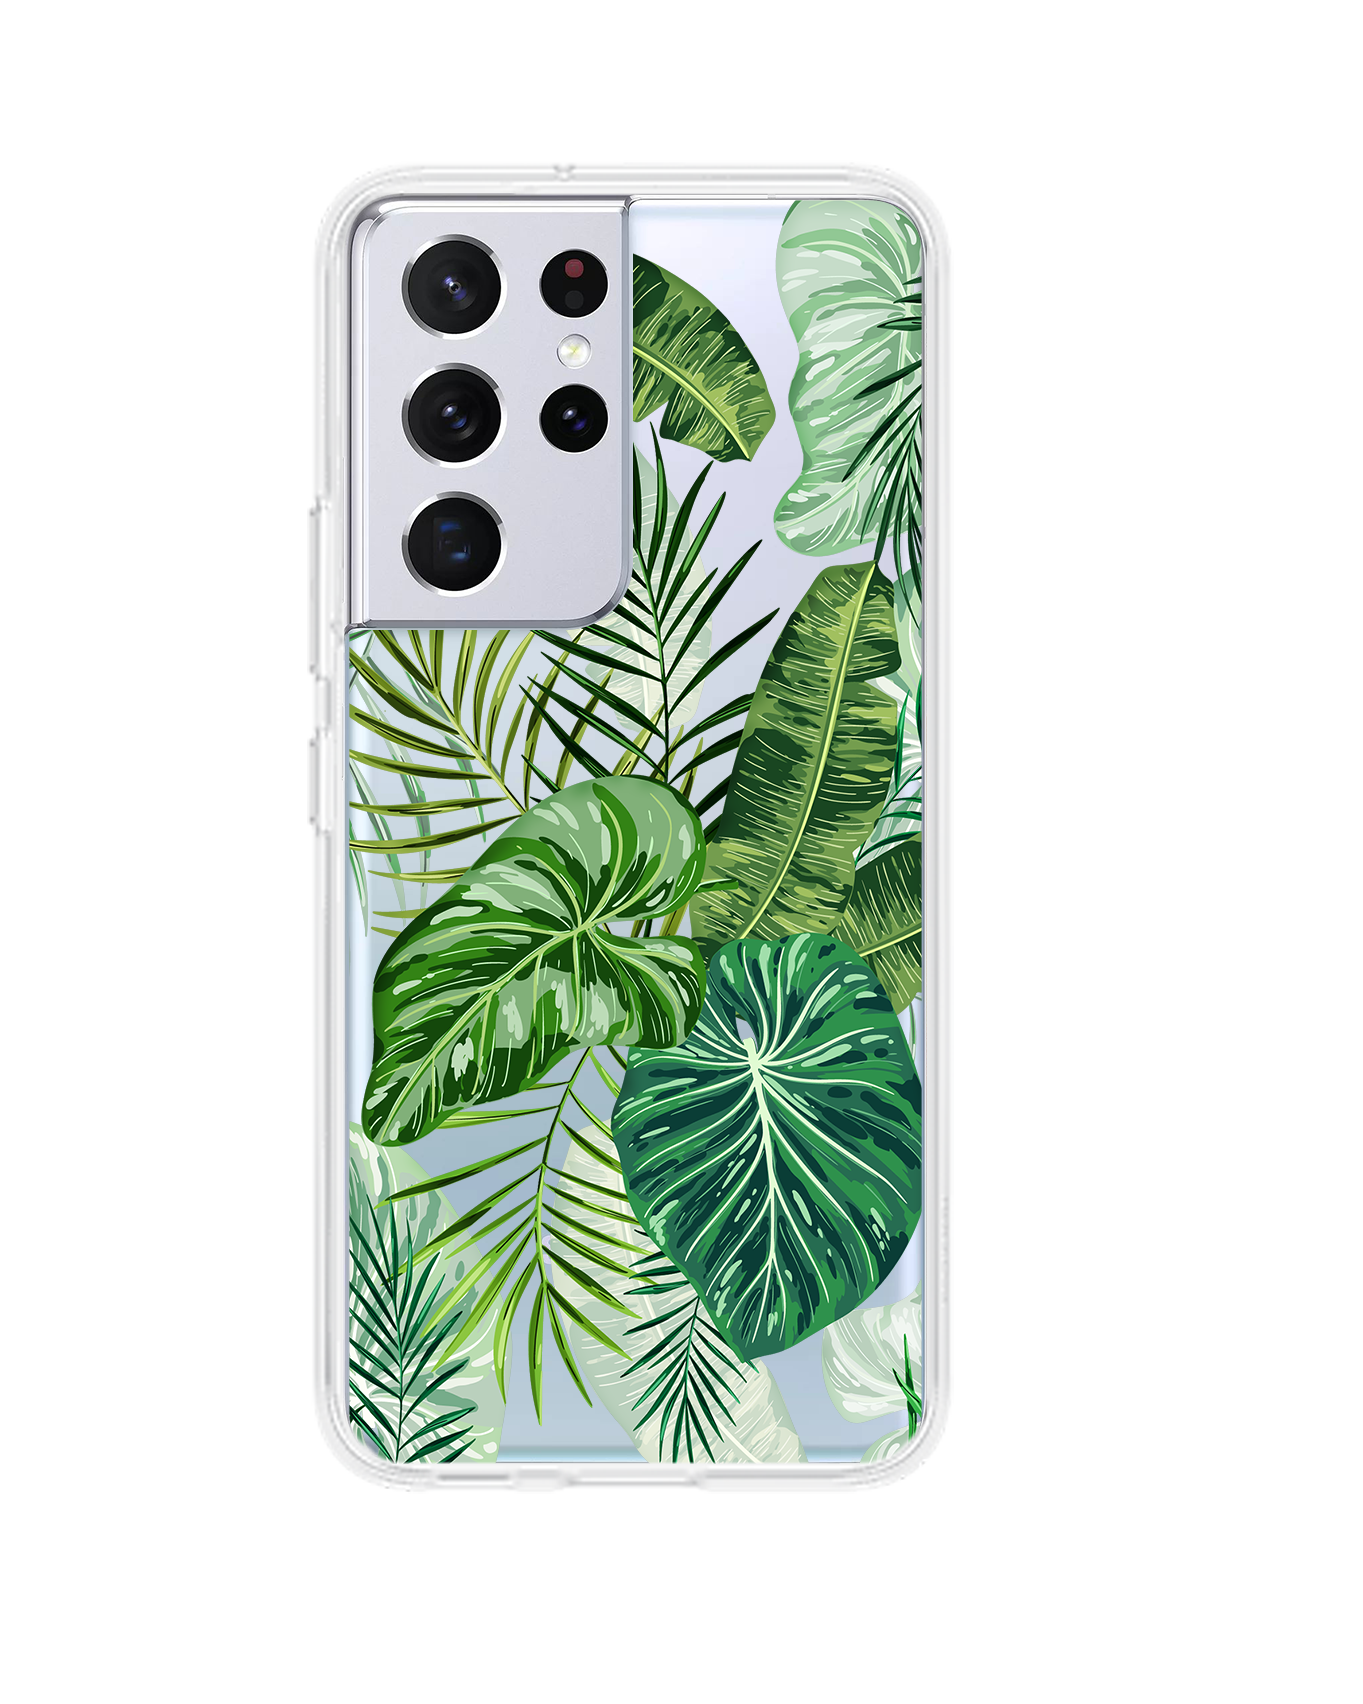 Android Rearguard Hybrid Case - Rainforest